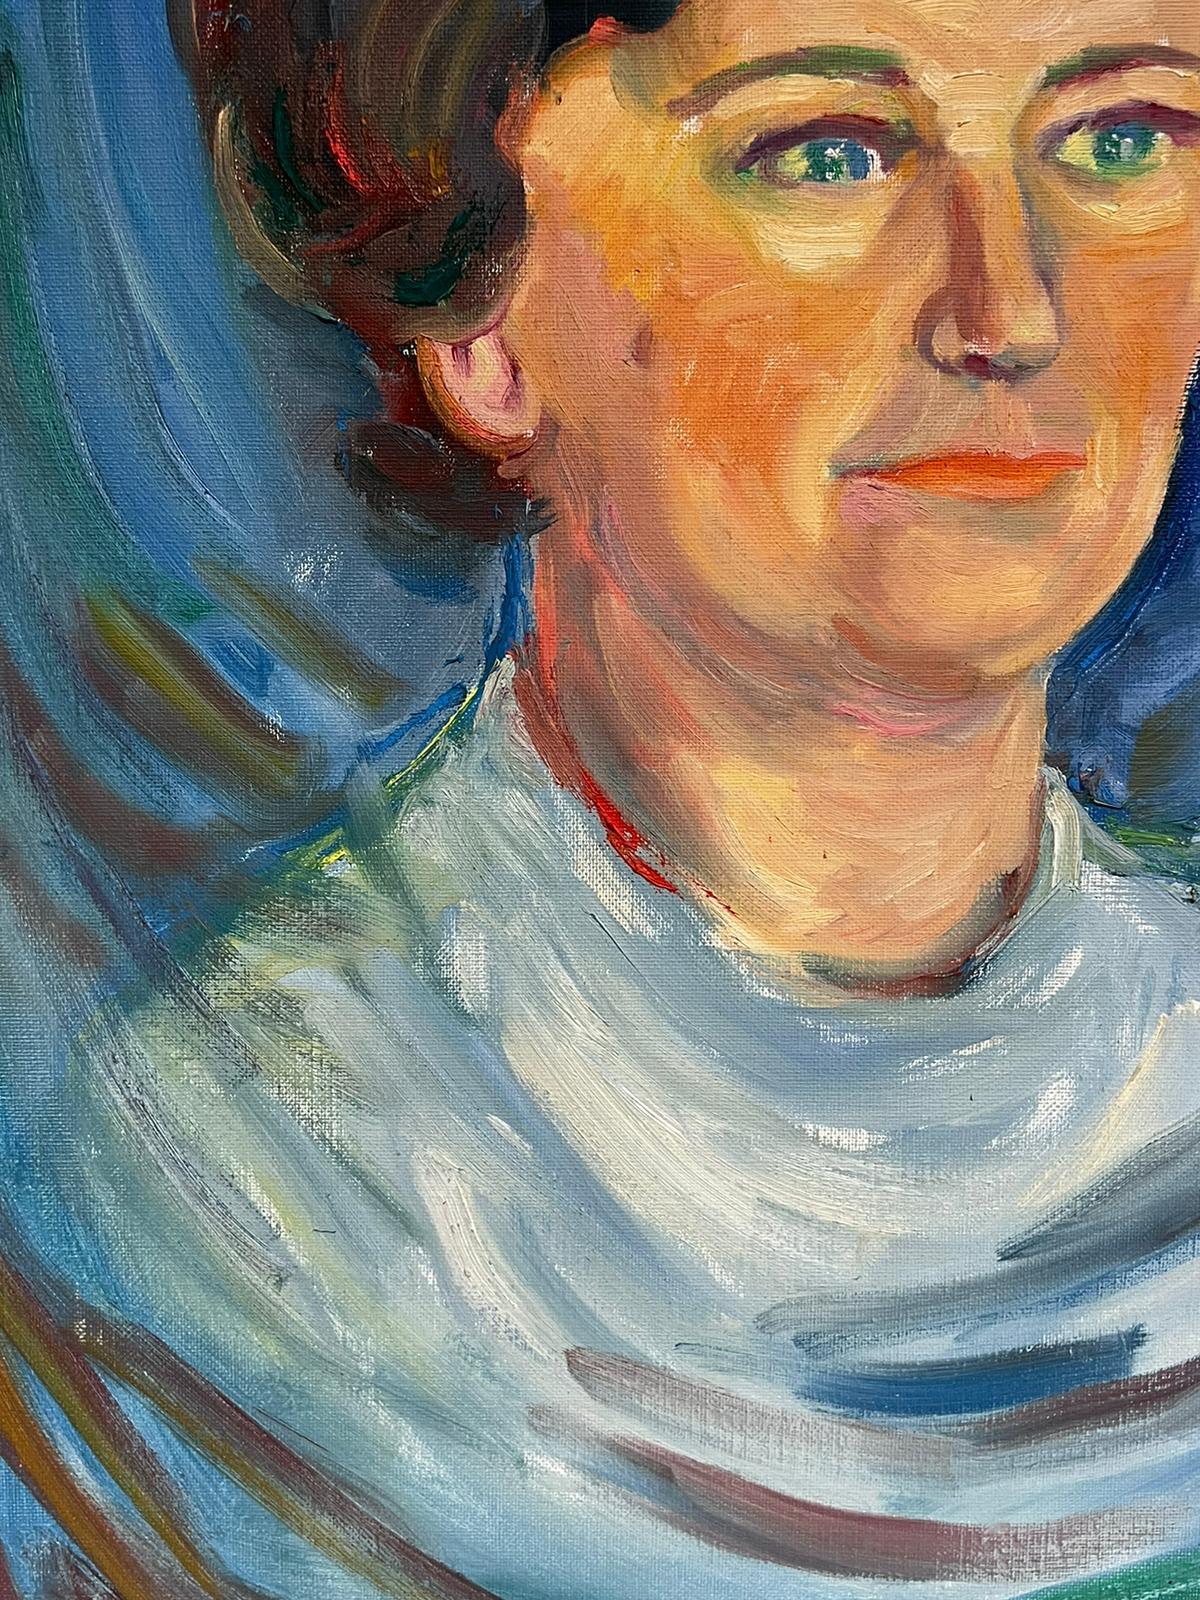 Portrait of a Lady
French Impressionist artist, circa 1975
inscribed verso
oil on canvas
canvas: 24 x 18 inches
provenance: private collection, France
condition: very good and sound condition